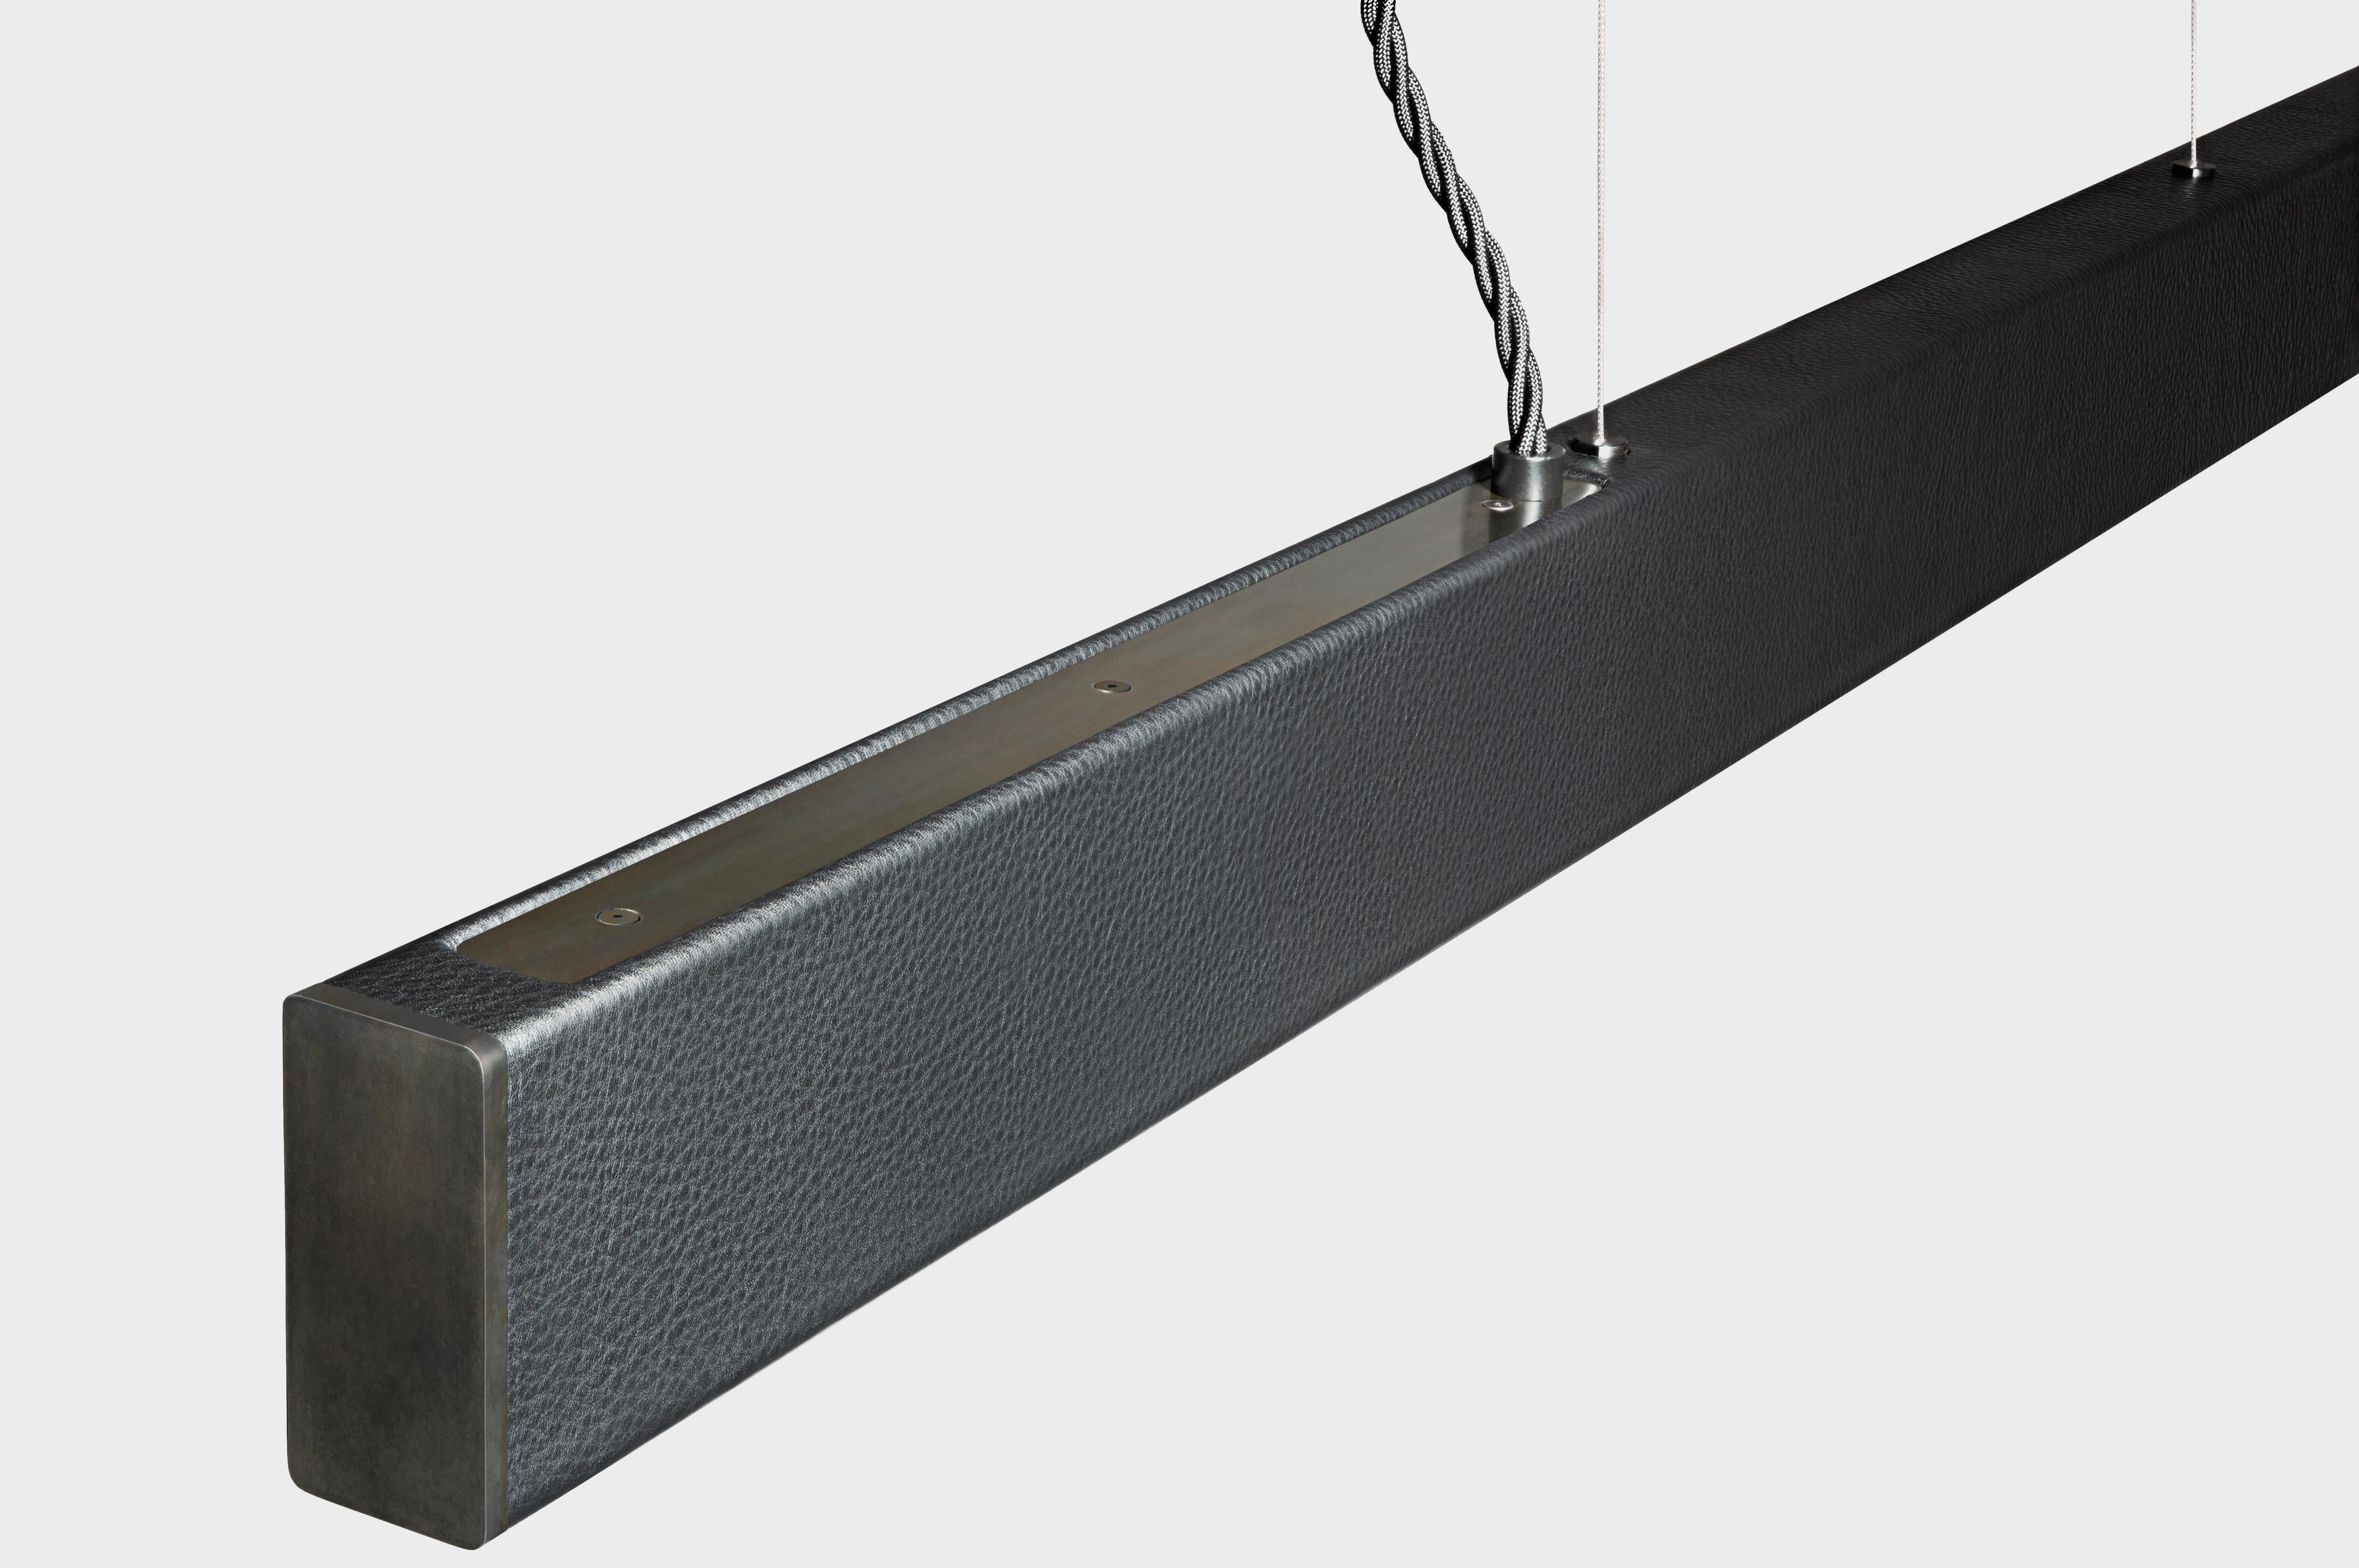 Remaining true to its roots while embracing new materials, the Leather 2x4 is a reimagining of our signature 2x4 Pendant. The classic metal hardware is accentuated by lush hand cut leather finishes, creating a sophisticated pendant that draws the